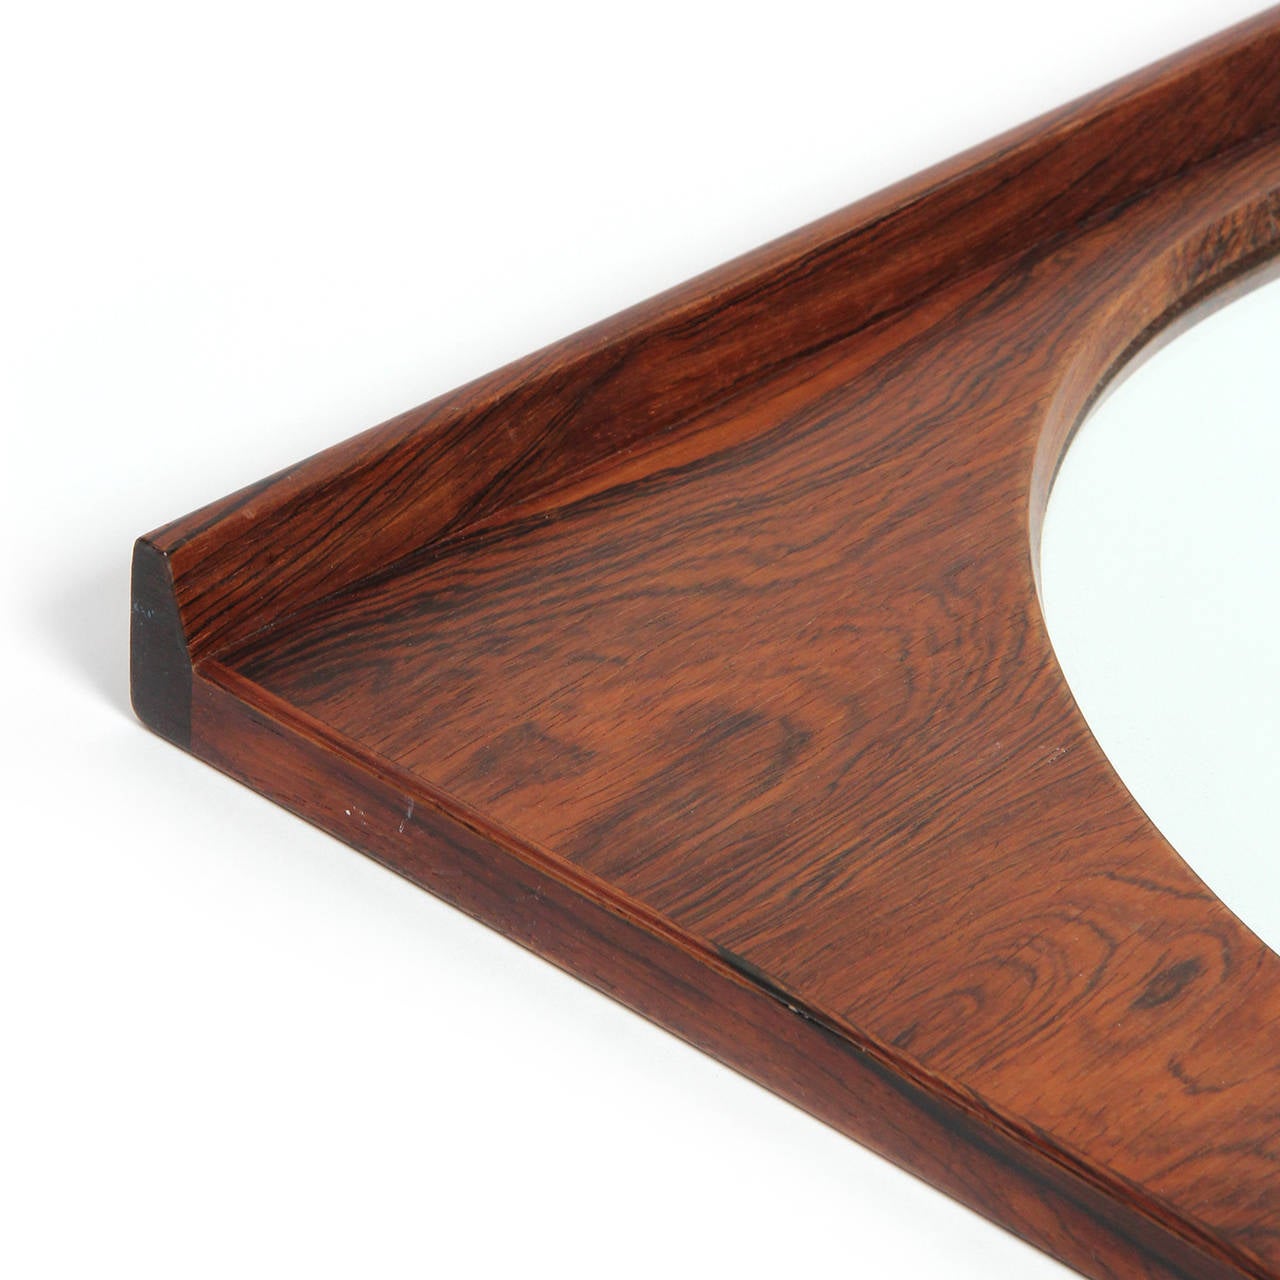 A finely crafted and proportioned wall mirror having a circular mirror centered in an expressive Brazilian rosewood frame with raised and beveled side rails.